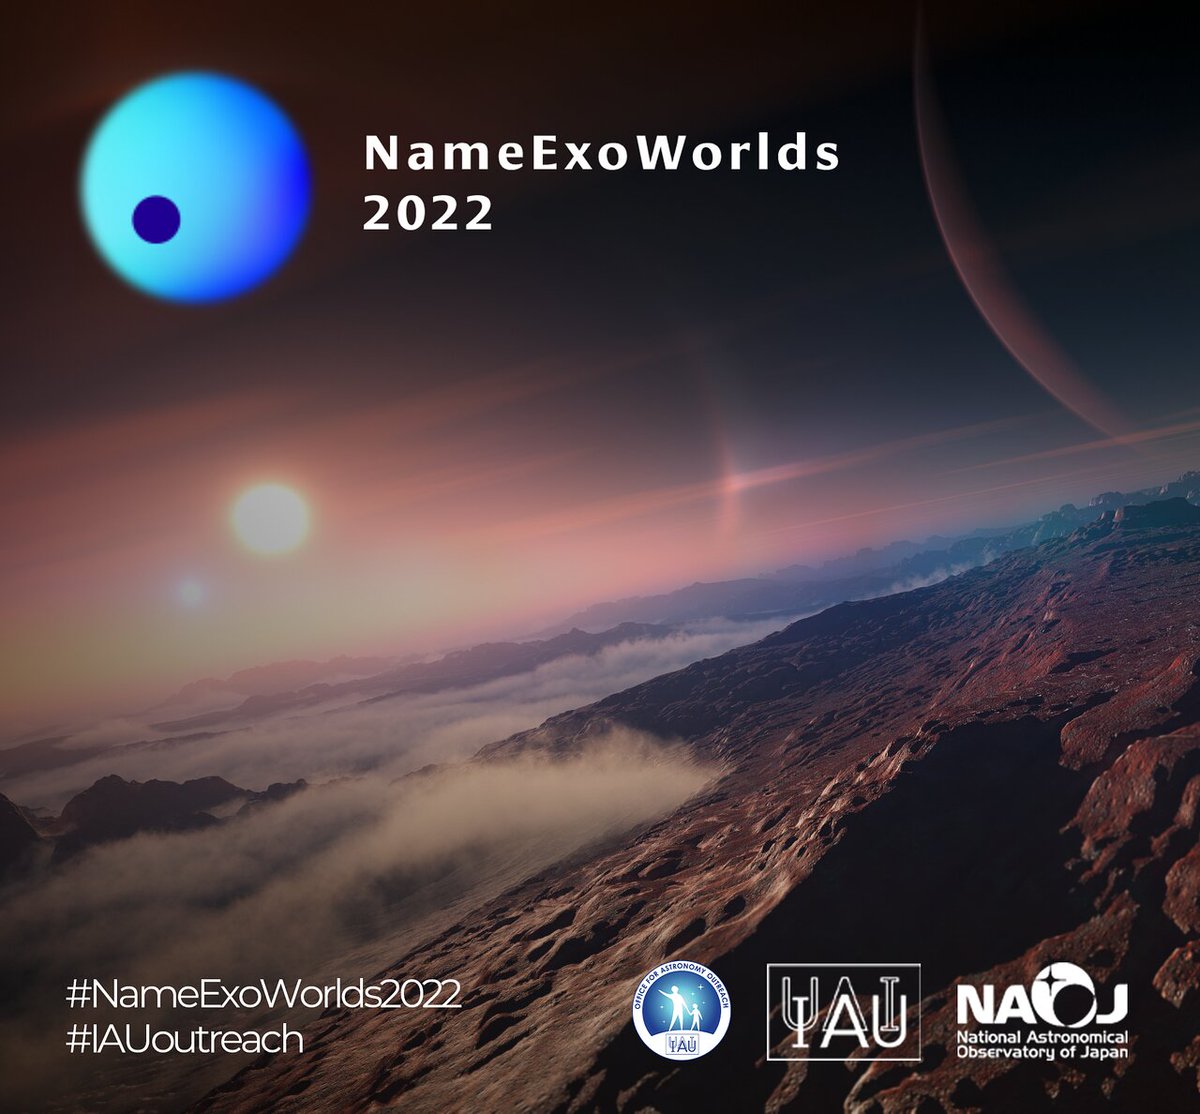 To celebrate the 10th anniversary of our IAU Office for Astronomy Outreach (OAO), we are launching a contest to name 20 exoplanetary systems to be observed by Webb Telescope. Read the full Press Release here: iau.org/news/pressrele…